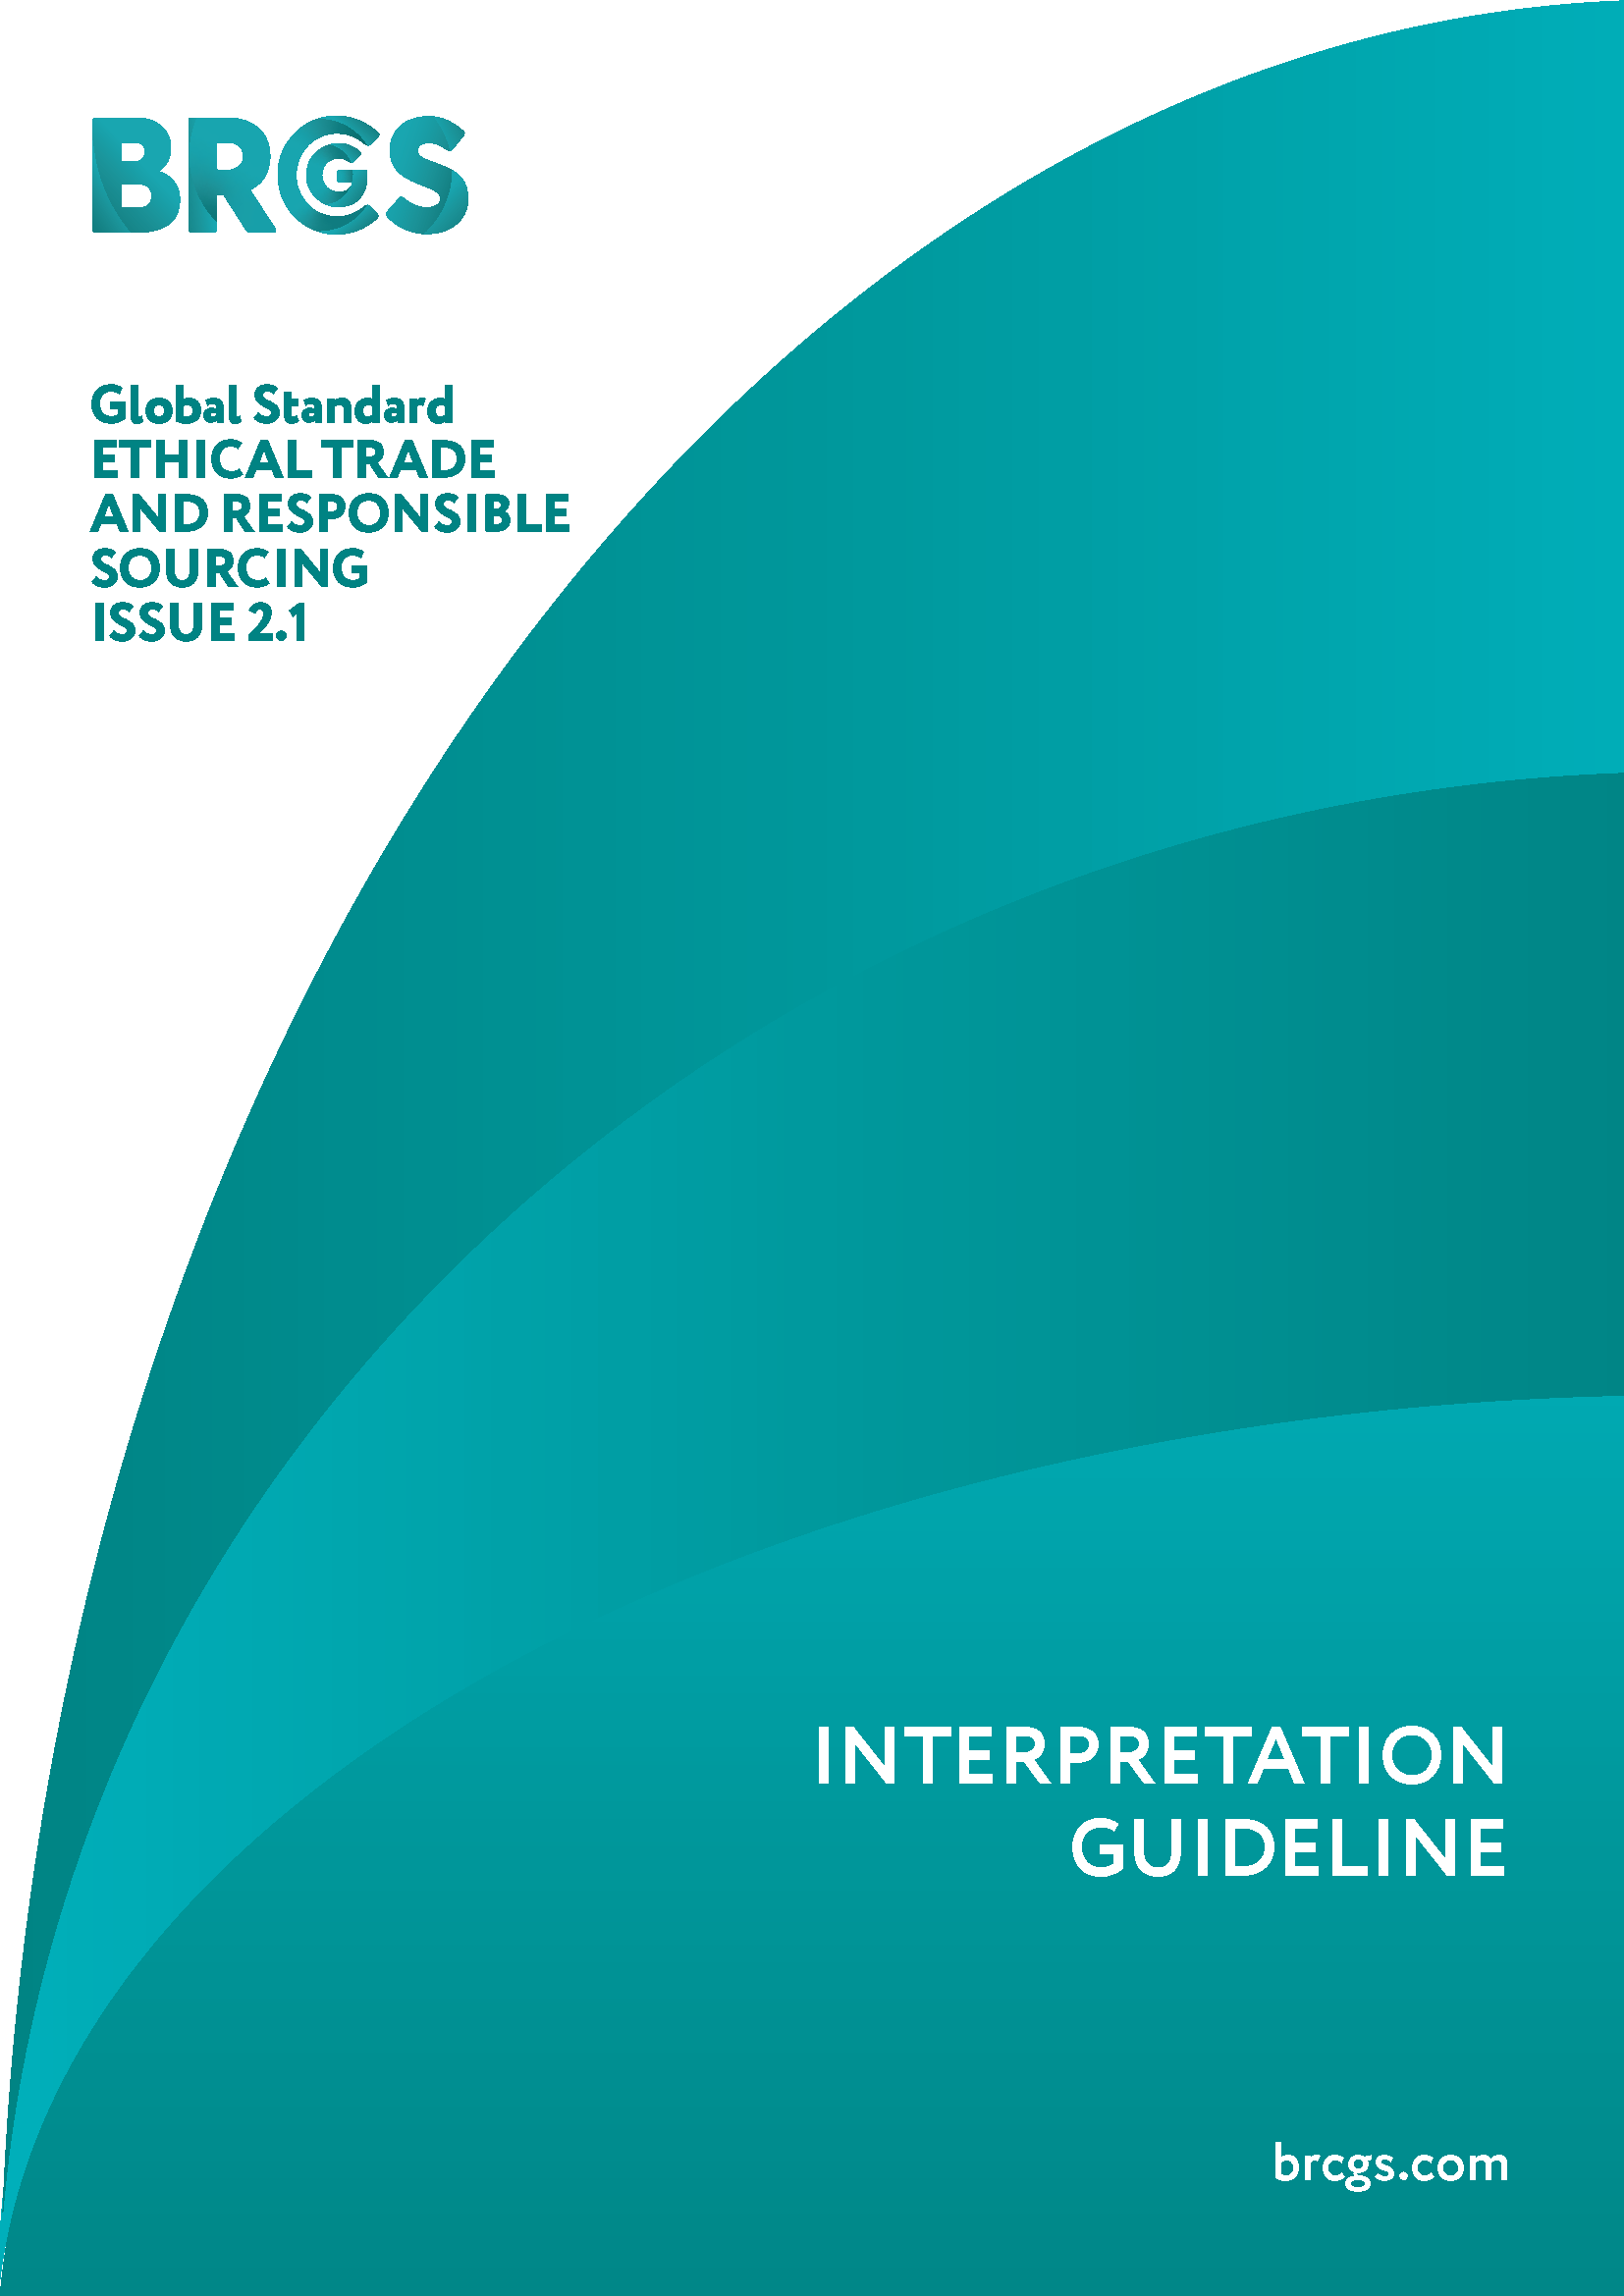 Global Standard Ethical Trade Responsible Sourcing (Issue 2.1)  Interpretation Guideline